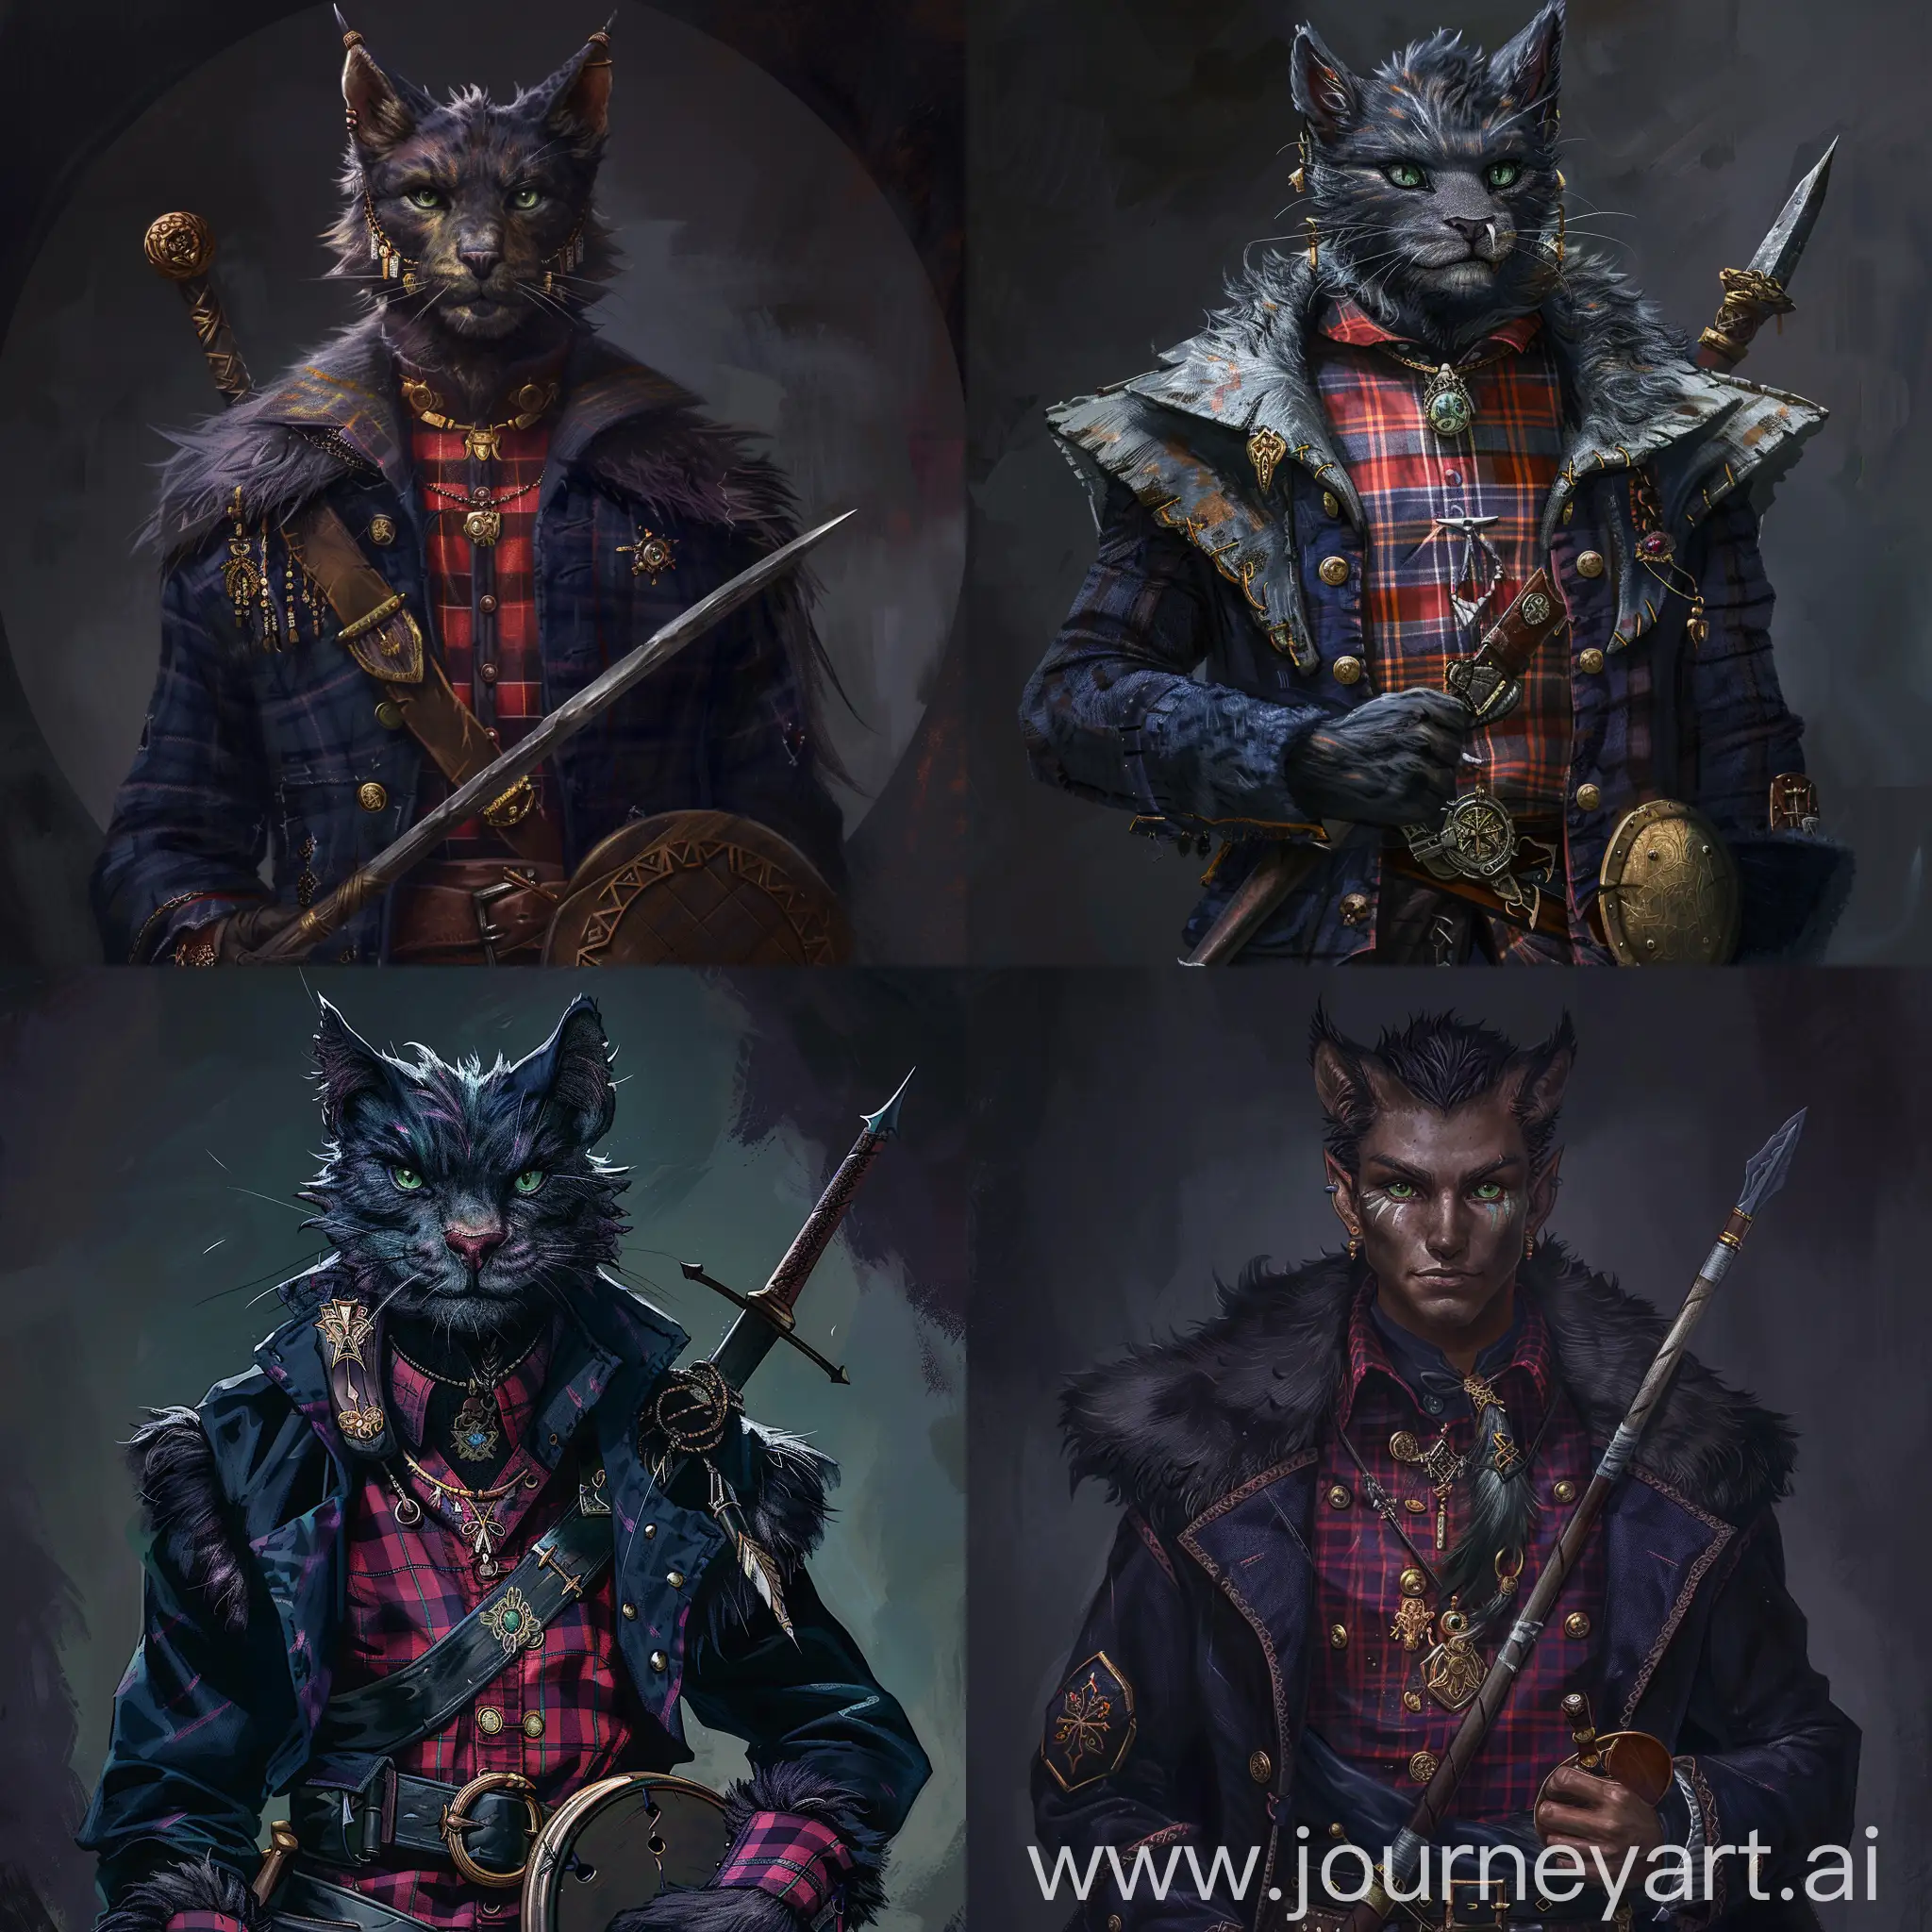 Tabaxi-Adventurer-in-Crimson-Plaid-Shirt-and-Dark-Blue-Coat-with-Rapier-and-Shield